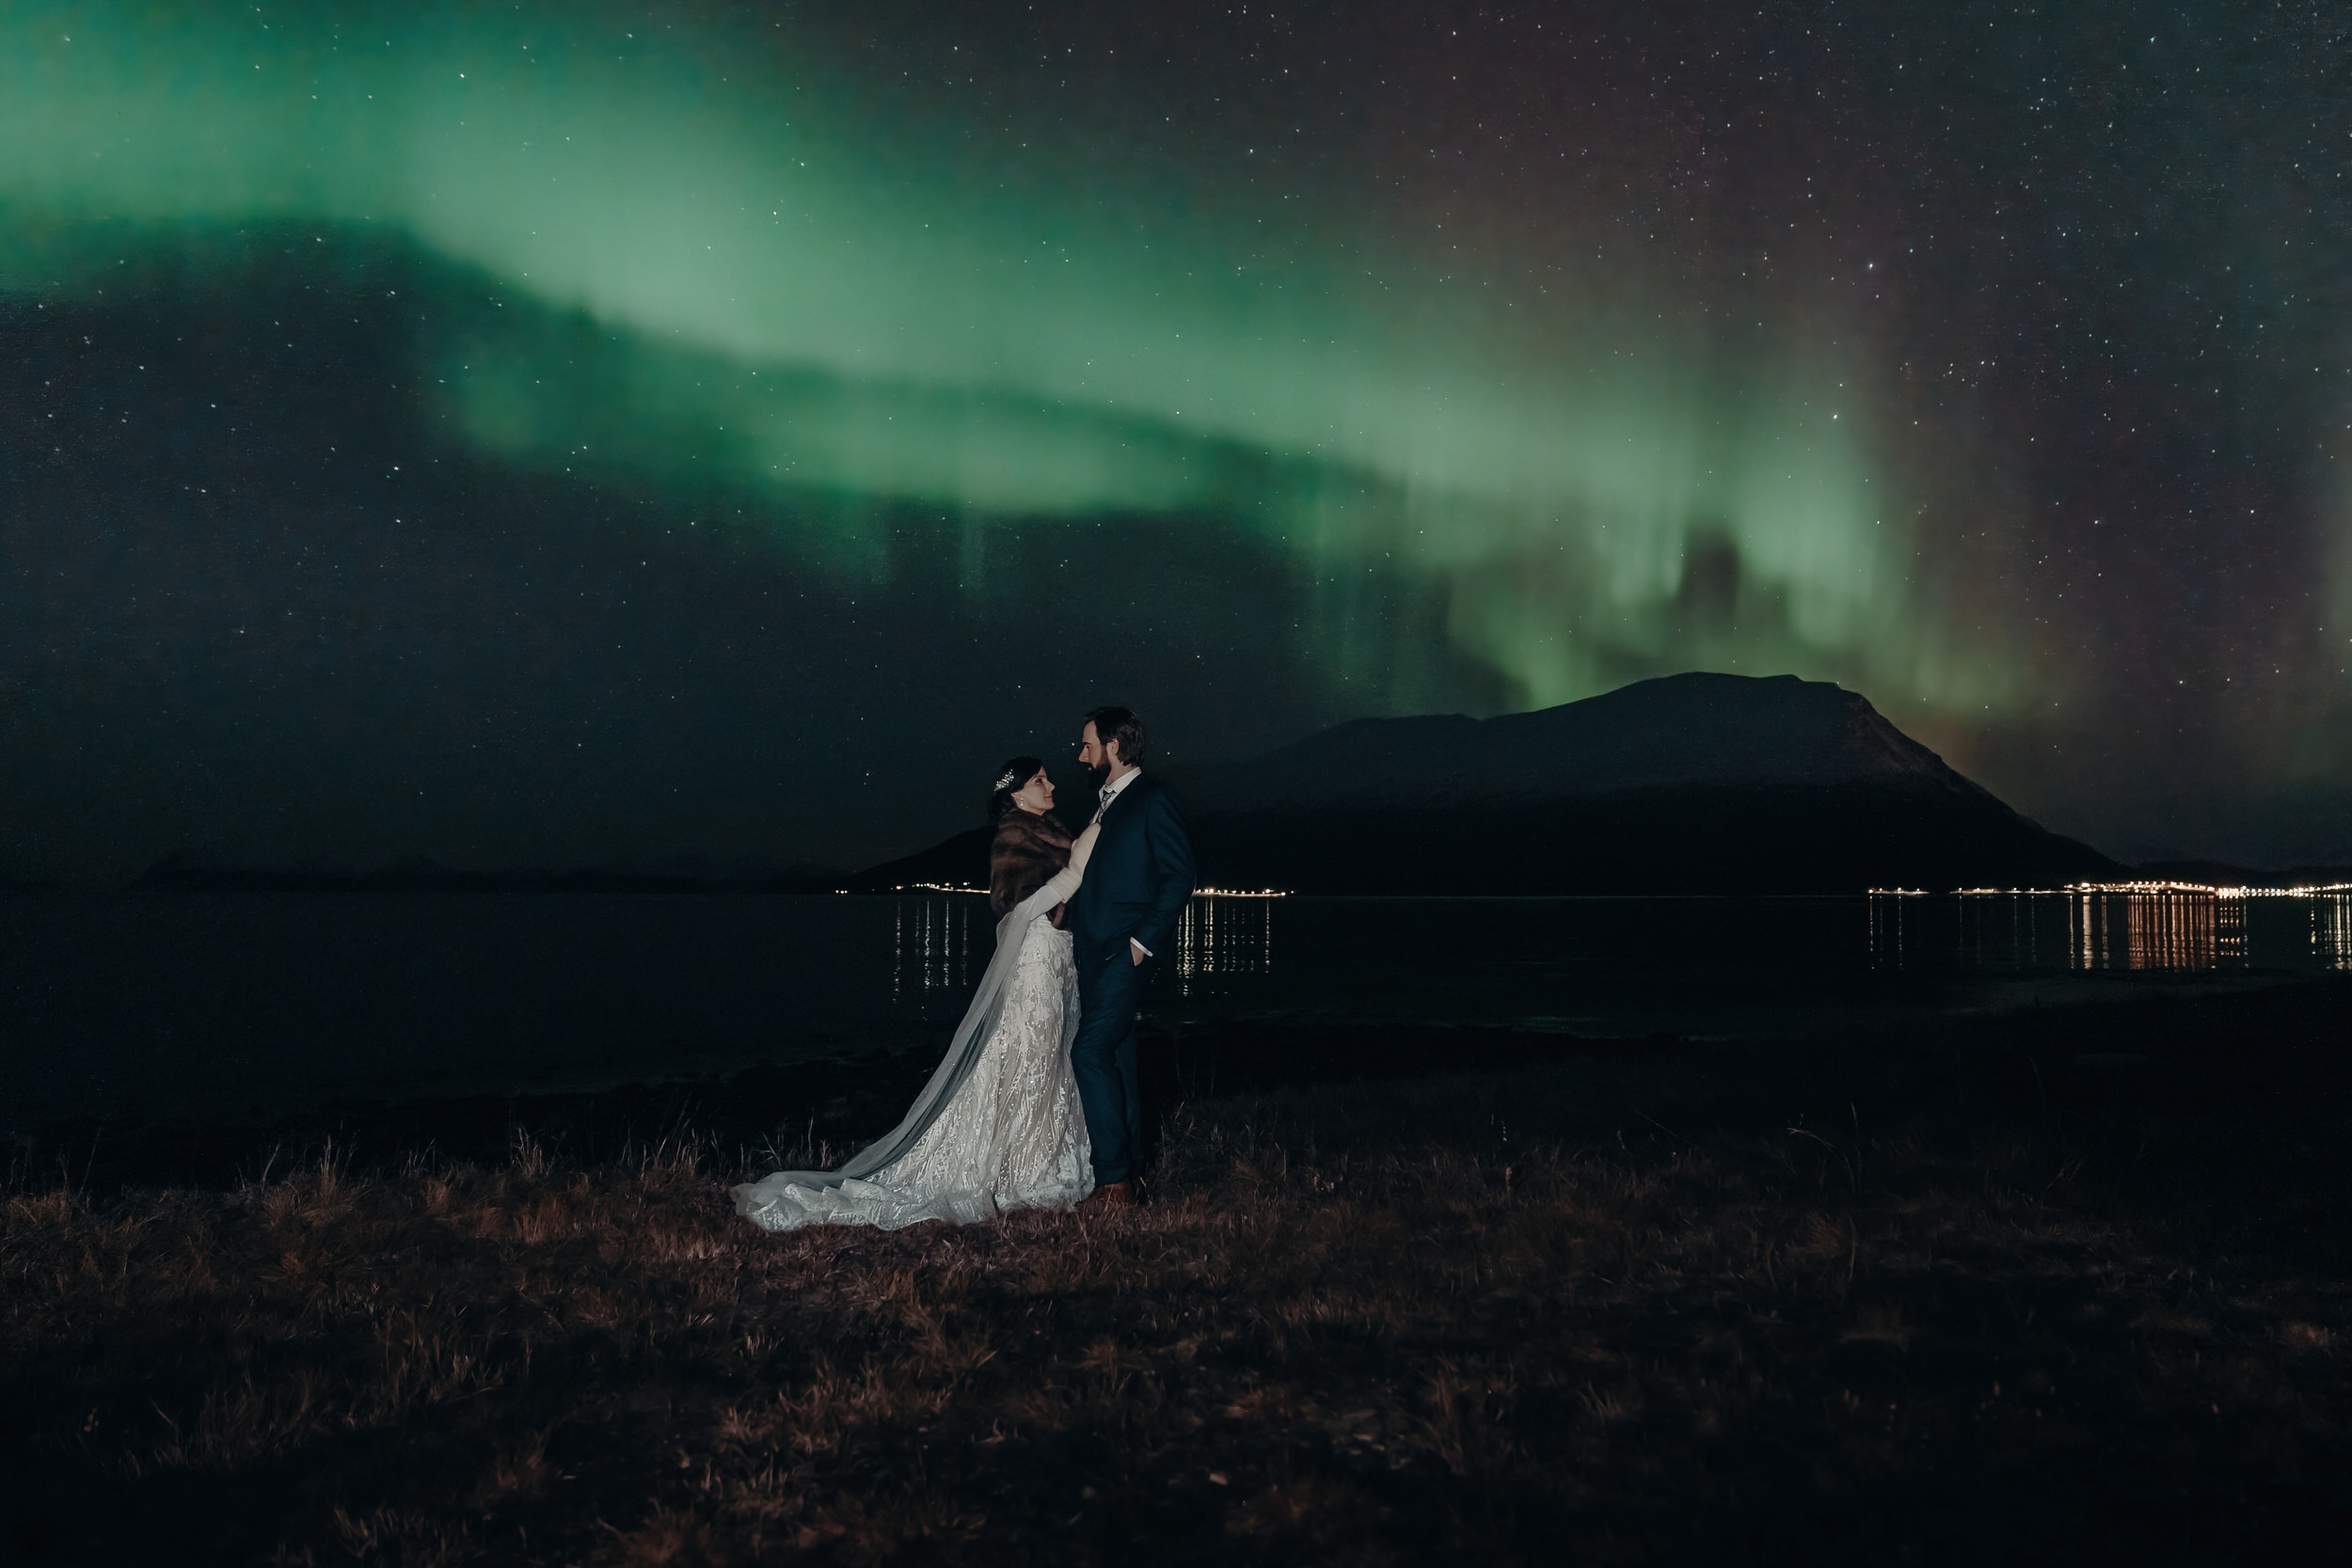 Wedding couple under the northern lights in norway